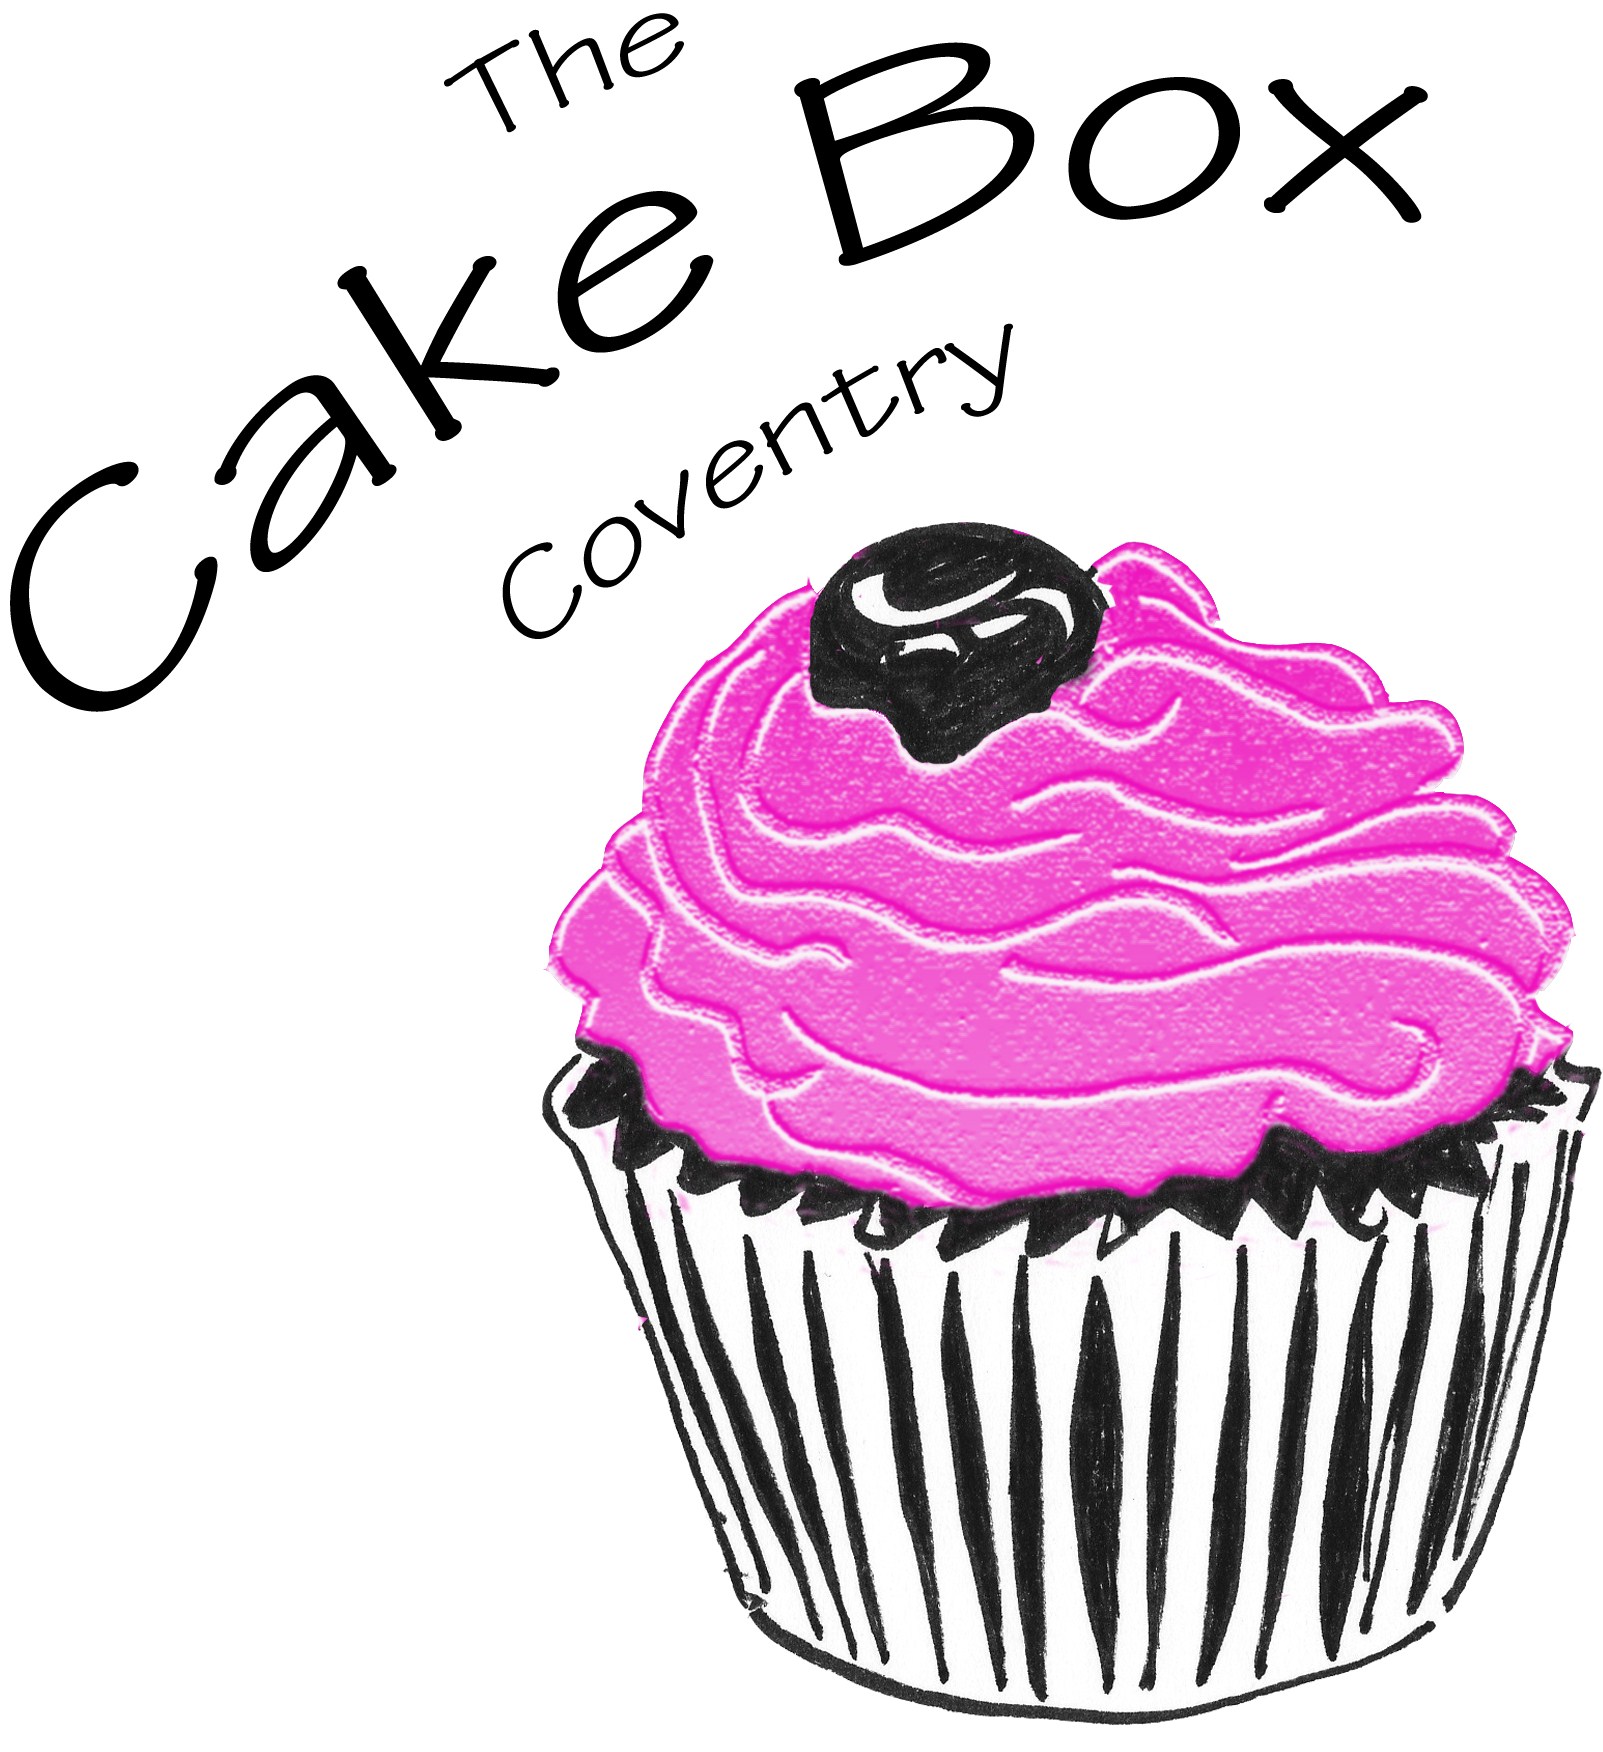 The Cake Box Coventry